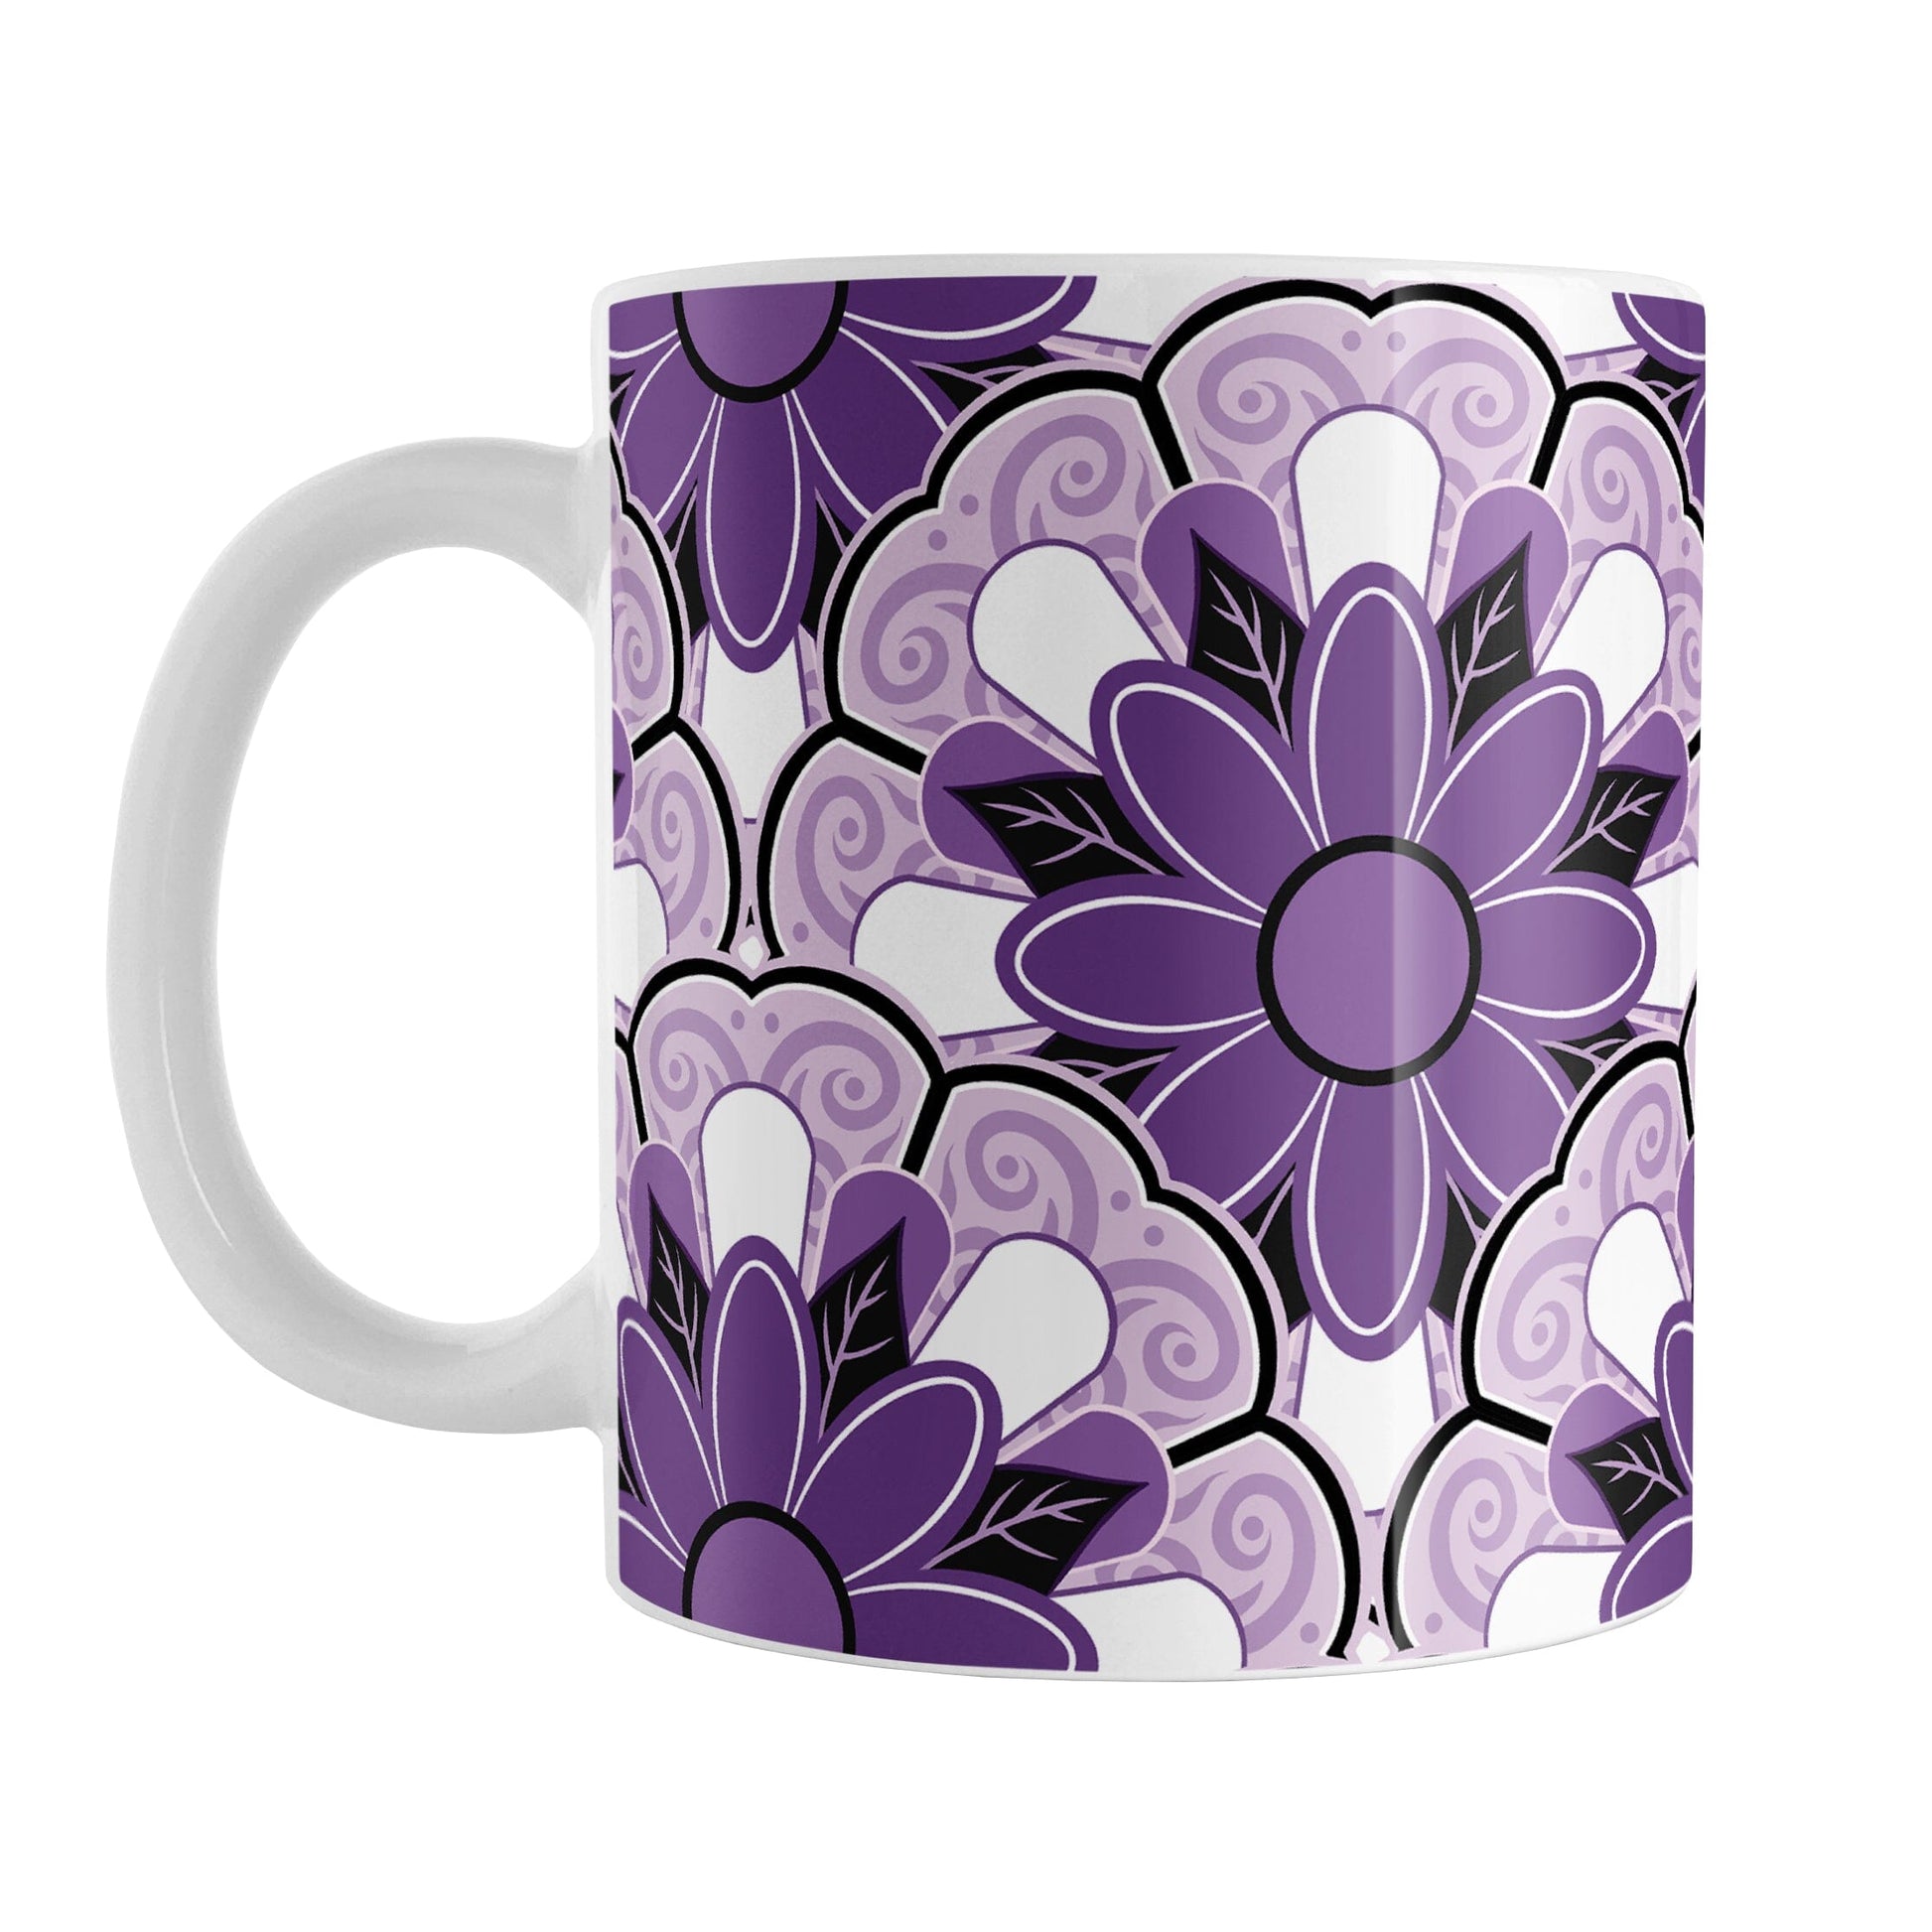 Purple Flower Tiles Pattern Mug (11oz) at Amy's Coffee Mugs. A ceramic coffee mug featuring a purple monochromatic pattern of floral-shaped tiles each with a stack of different purple flower designs centered within it. This large flower pattern design wraps around the mug to the handle.